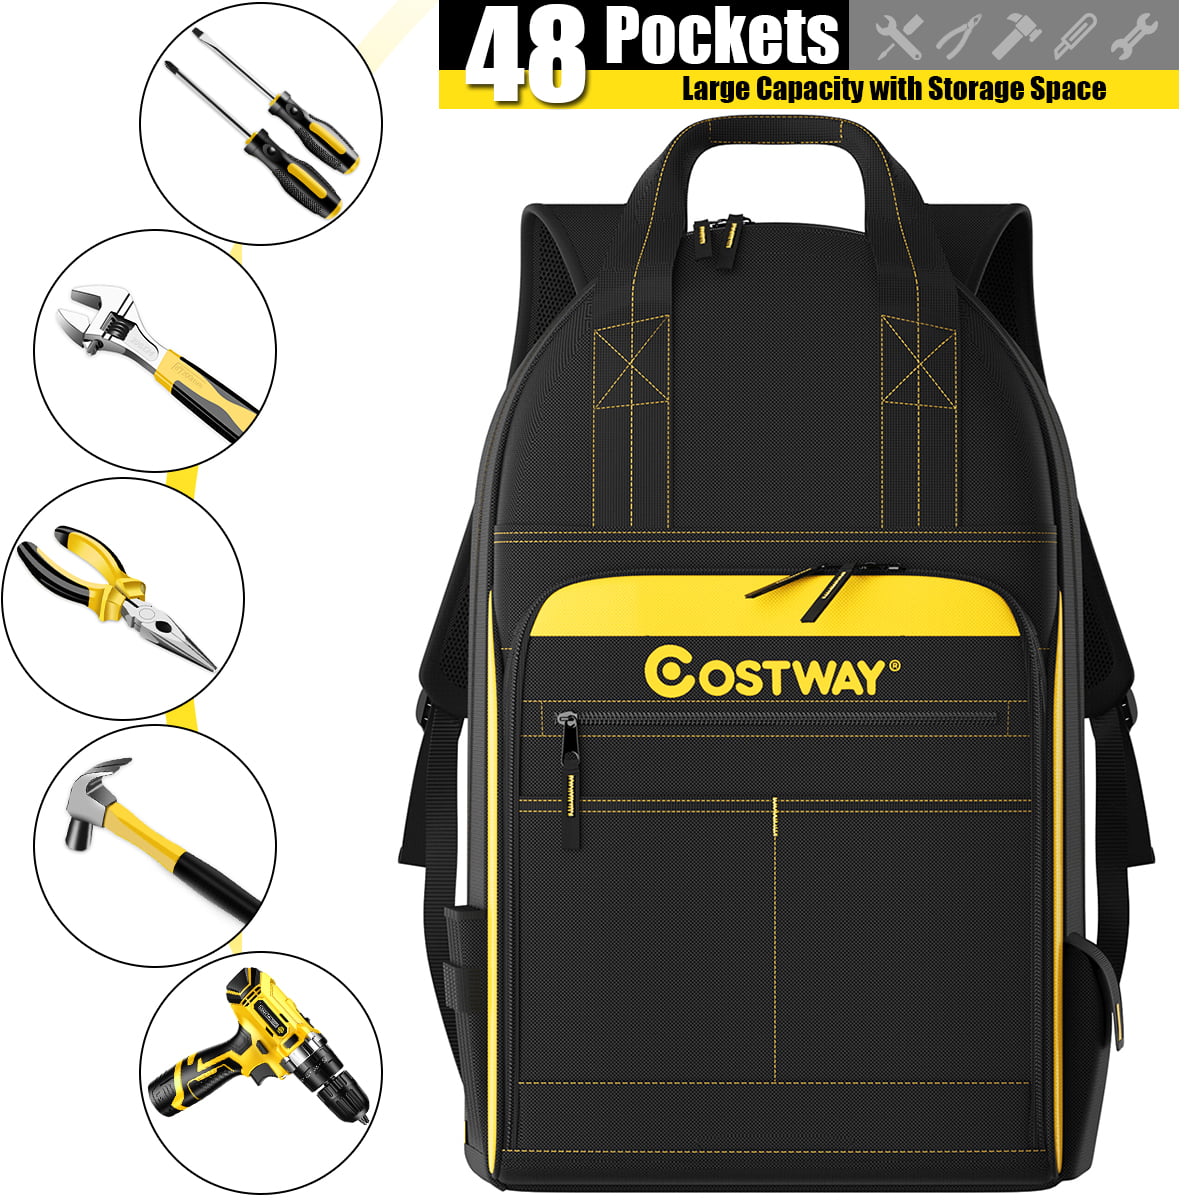 XtremepowerUS Contractor Tool Backpack 38-Pockets Bag Organizer 